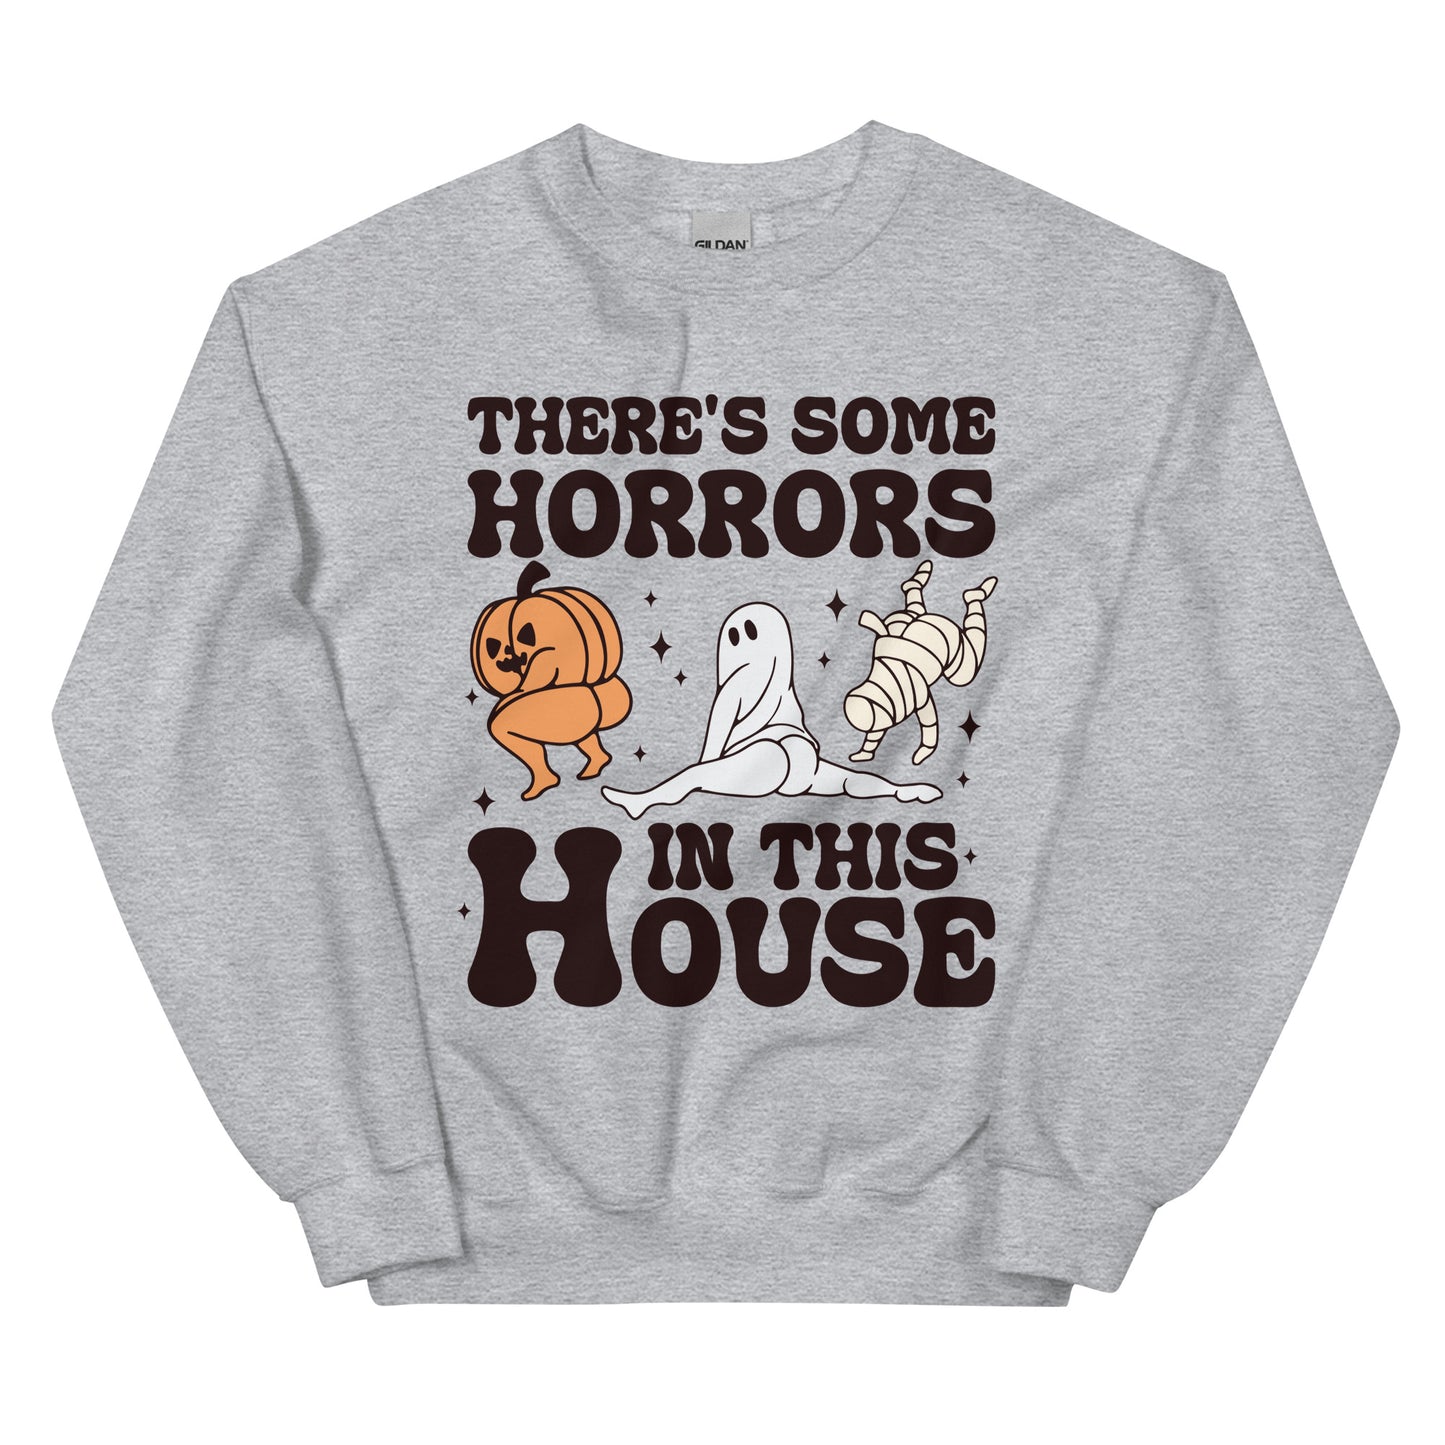 There's some horrors in the house Sweatshirt